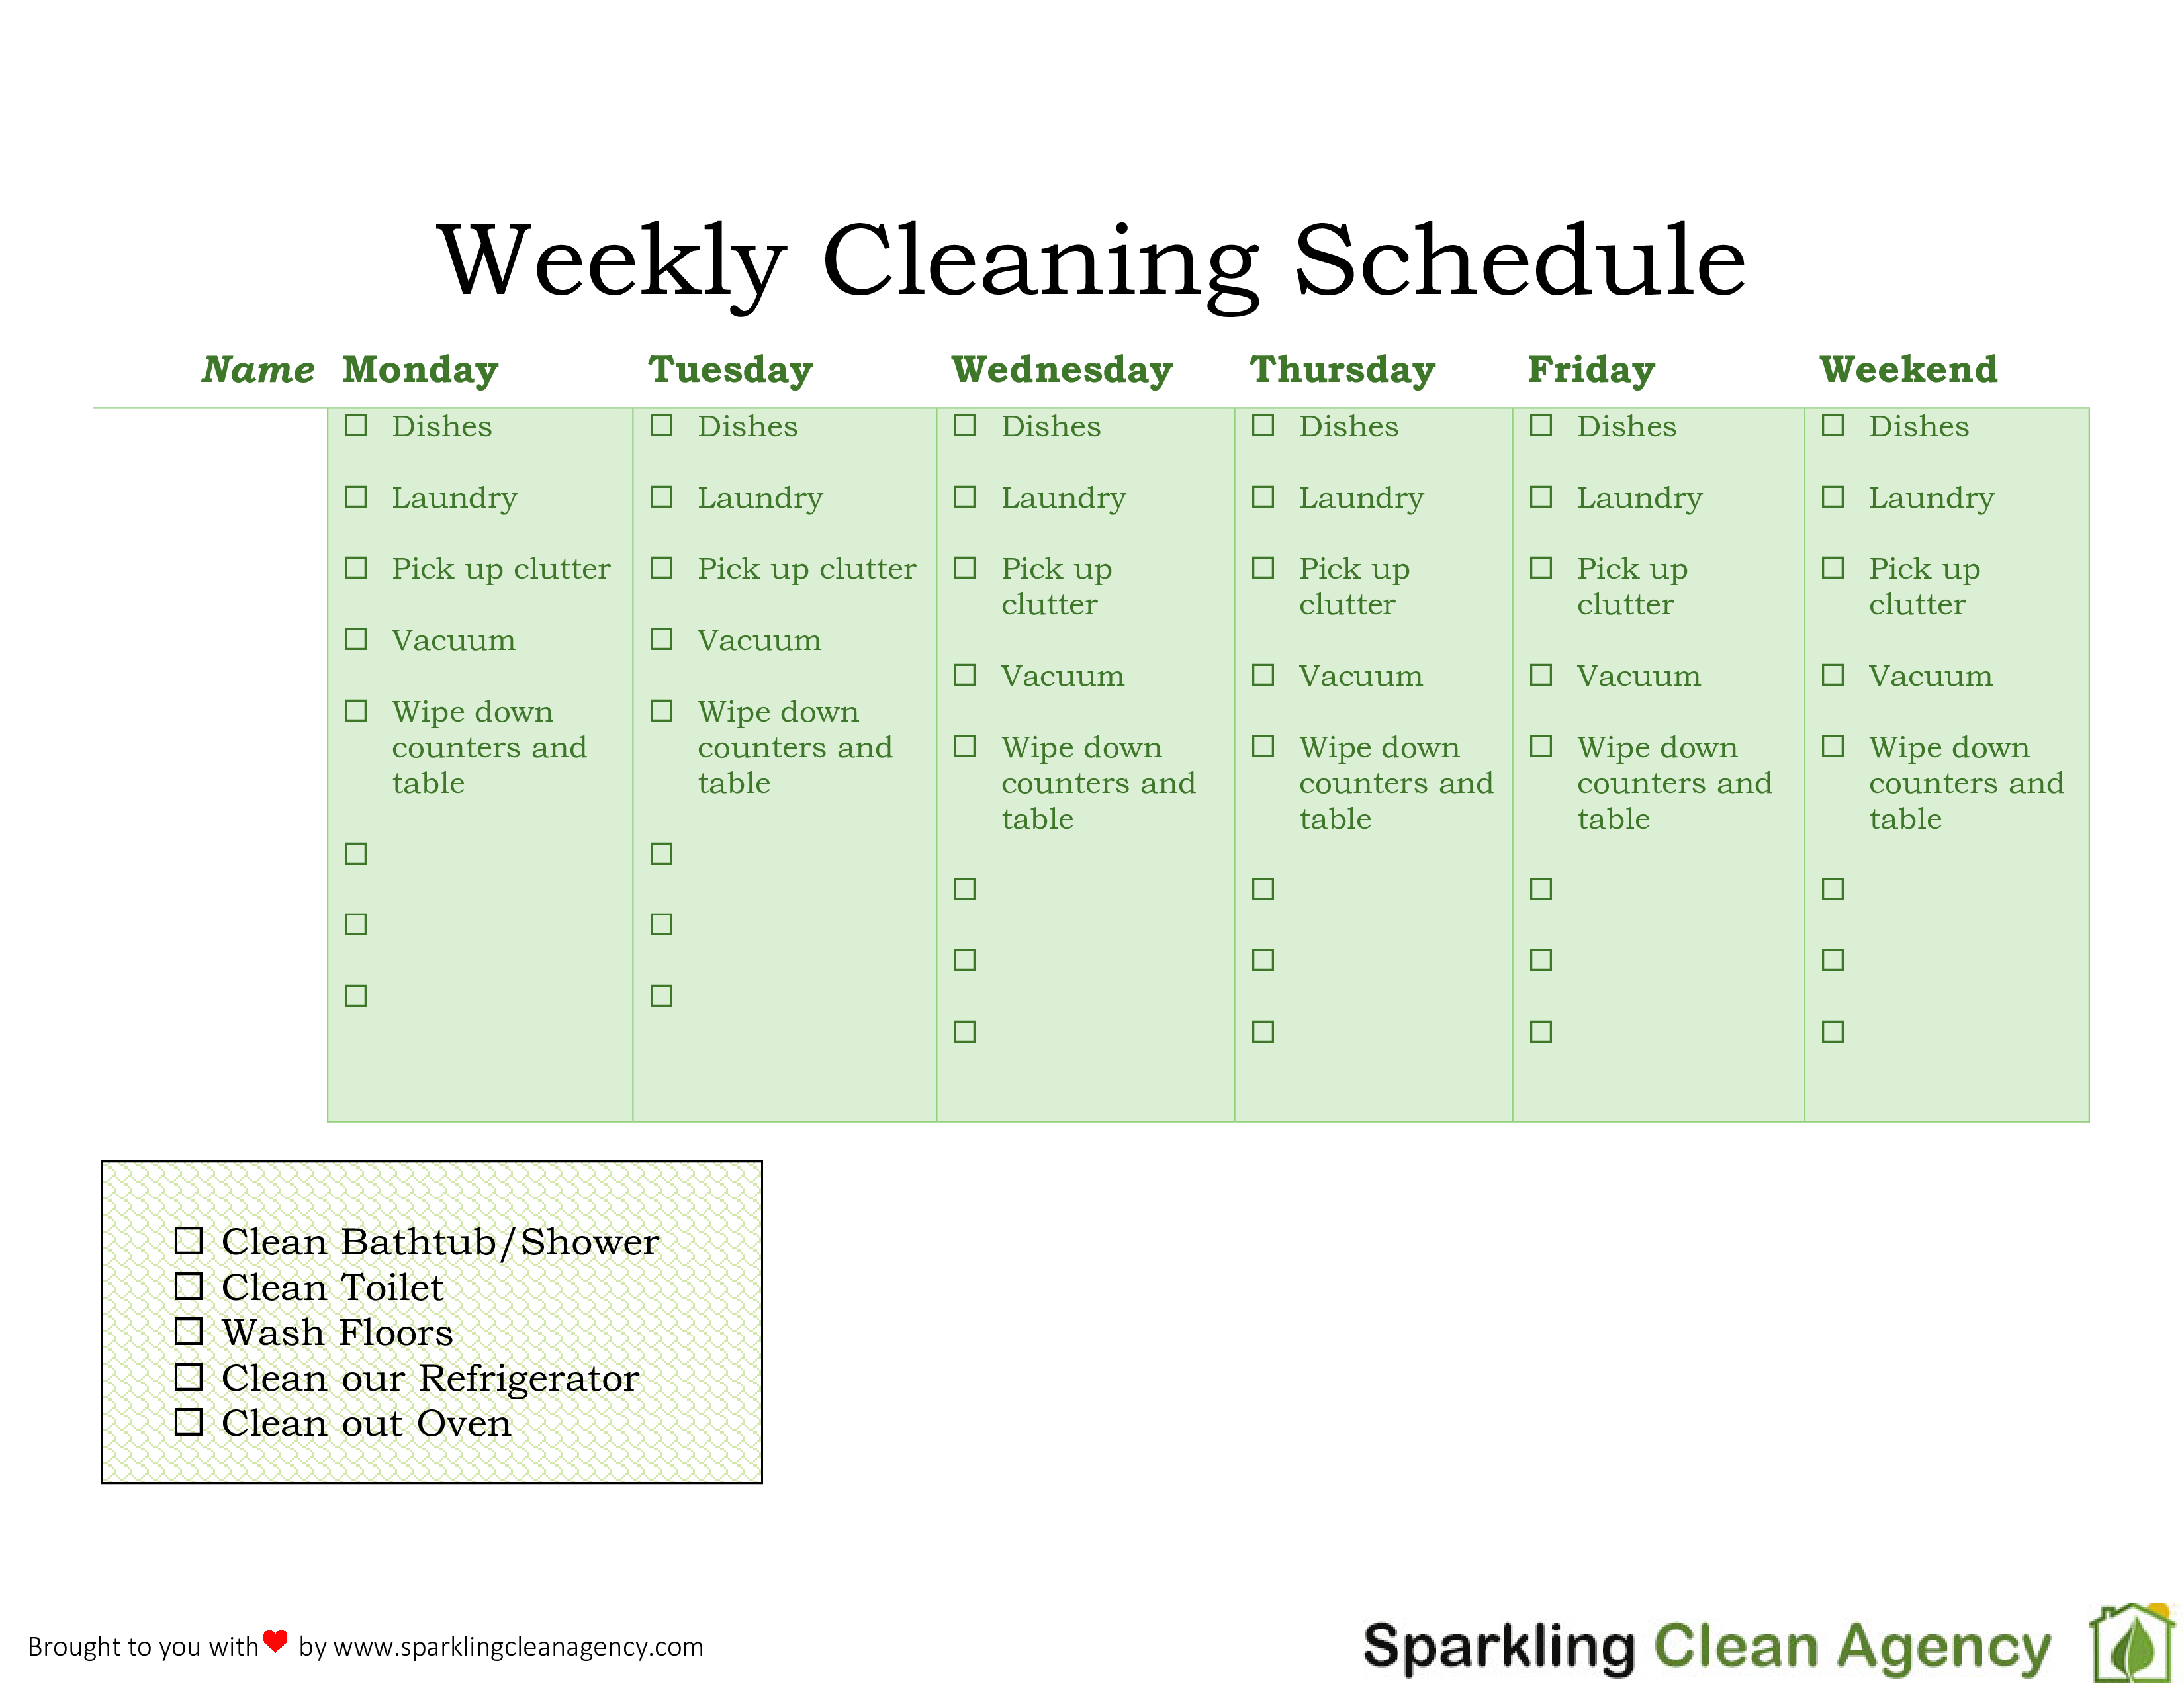 Weekly Cleaning Schedule main image